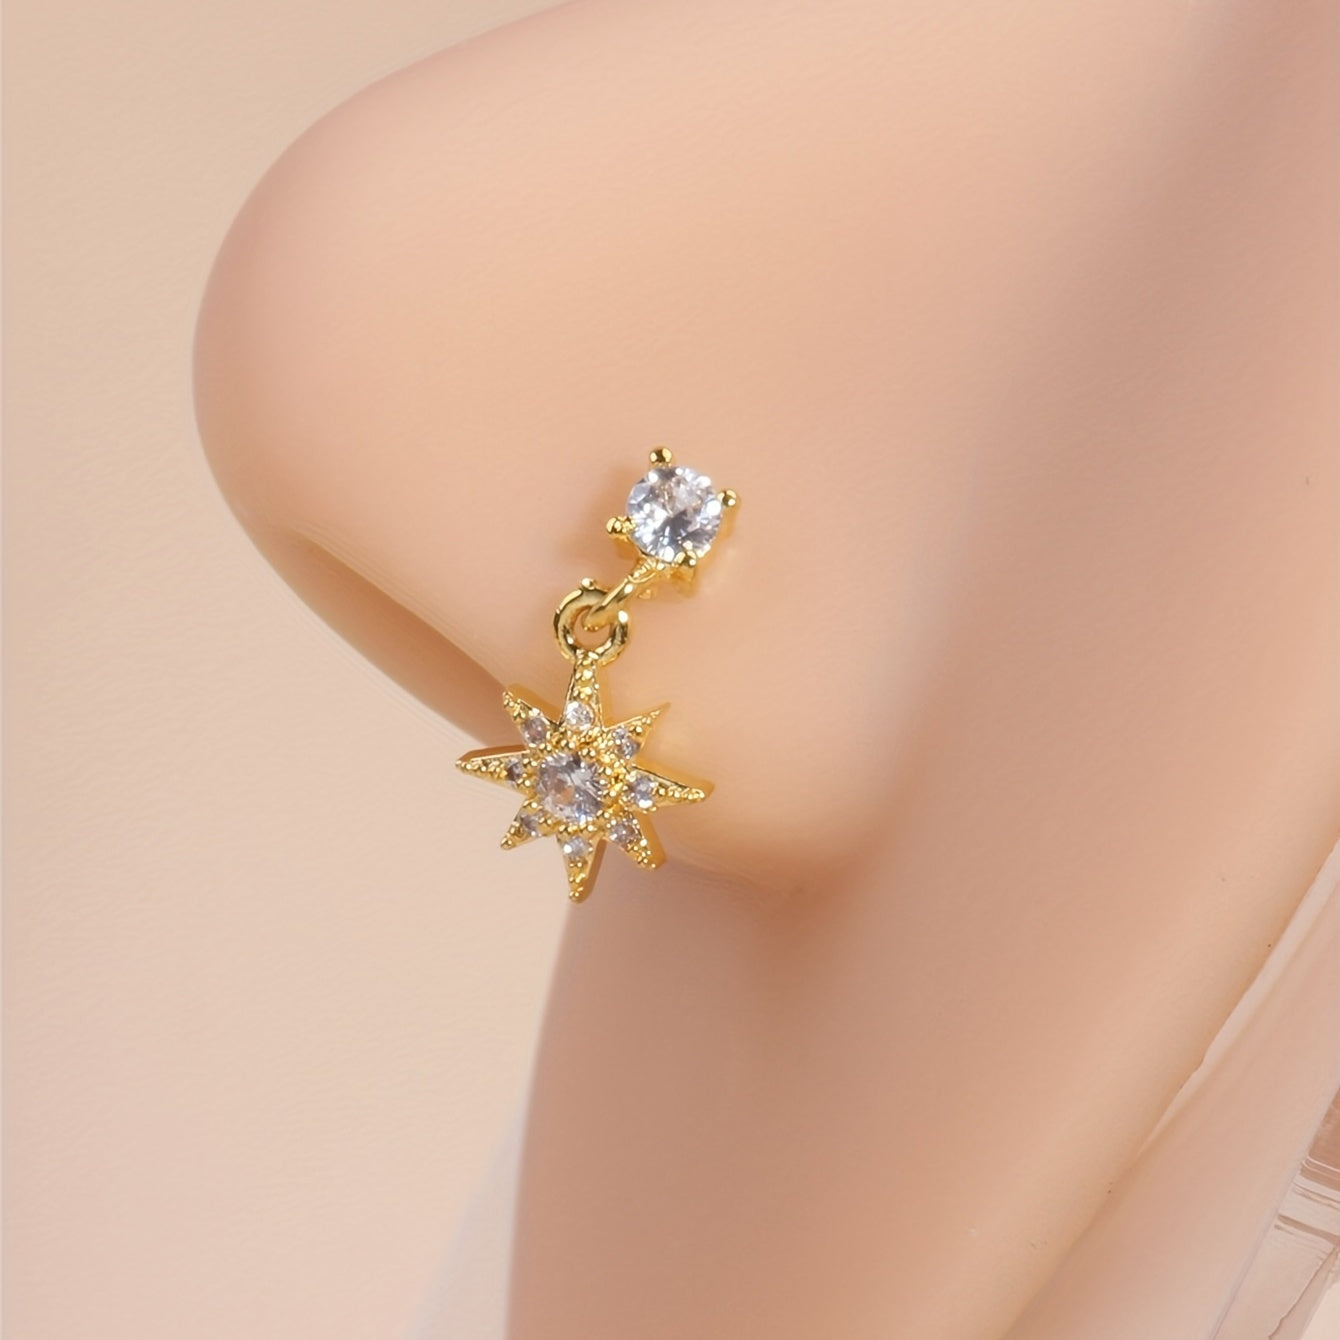 Add a touch of sunshine to your look with our Sun Pendant Nose Ring Stud featuring Shiny Zircon Inlay